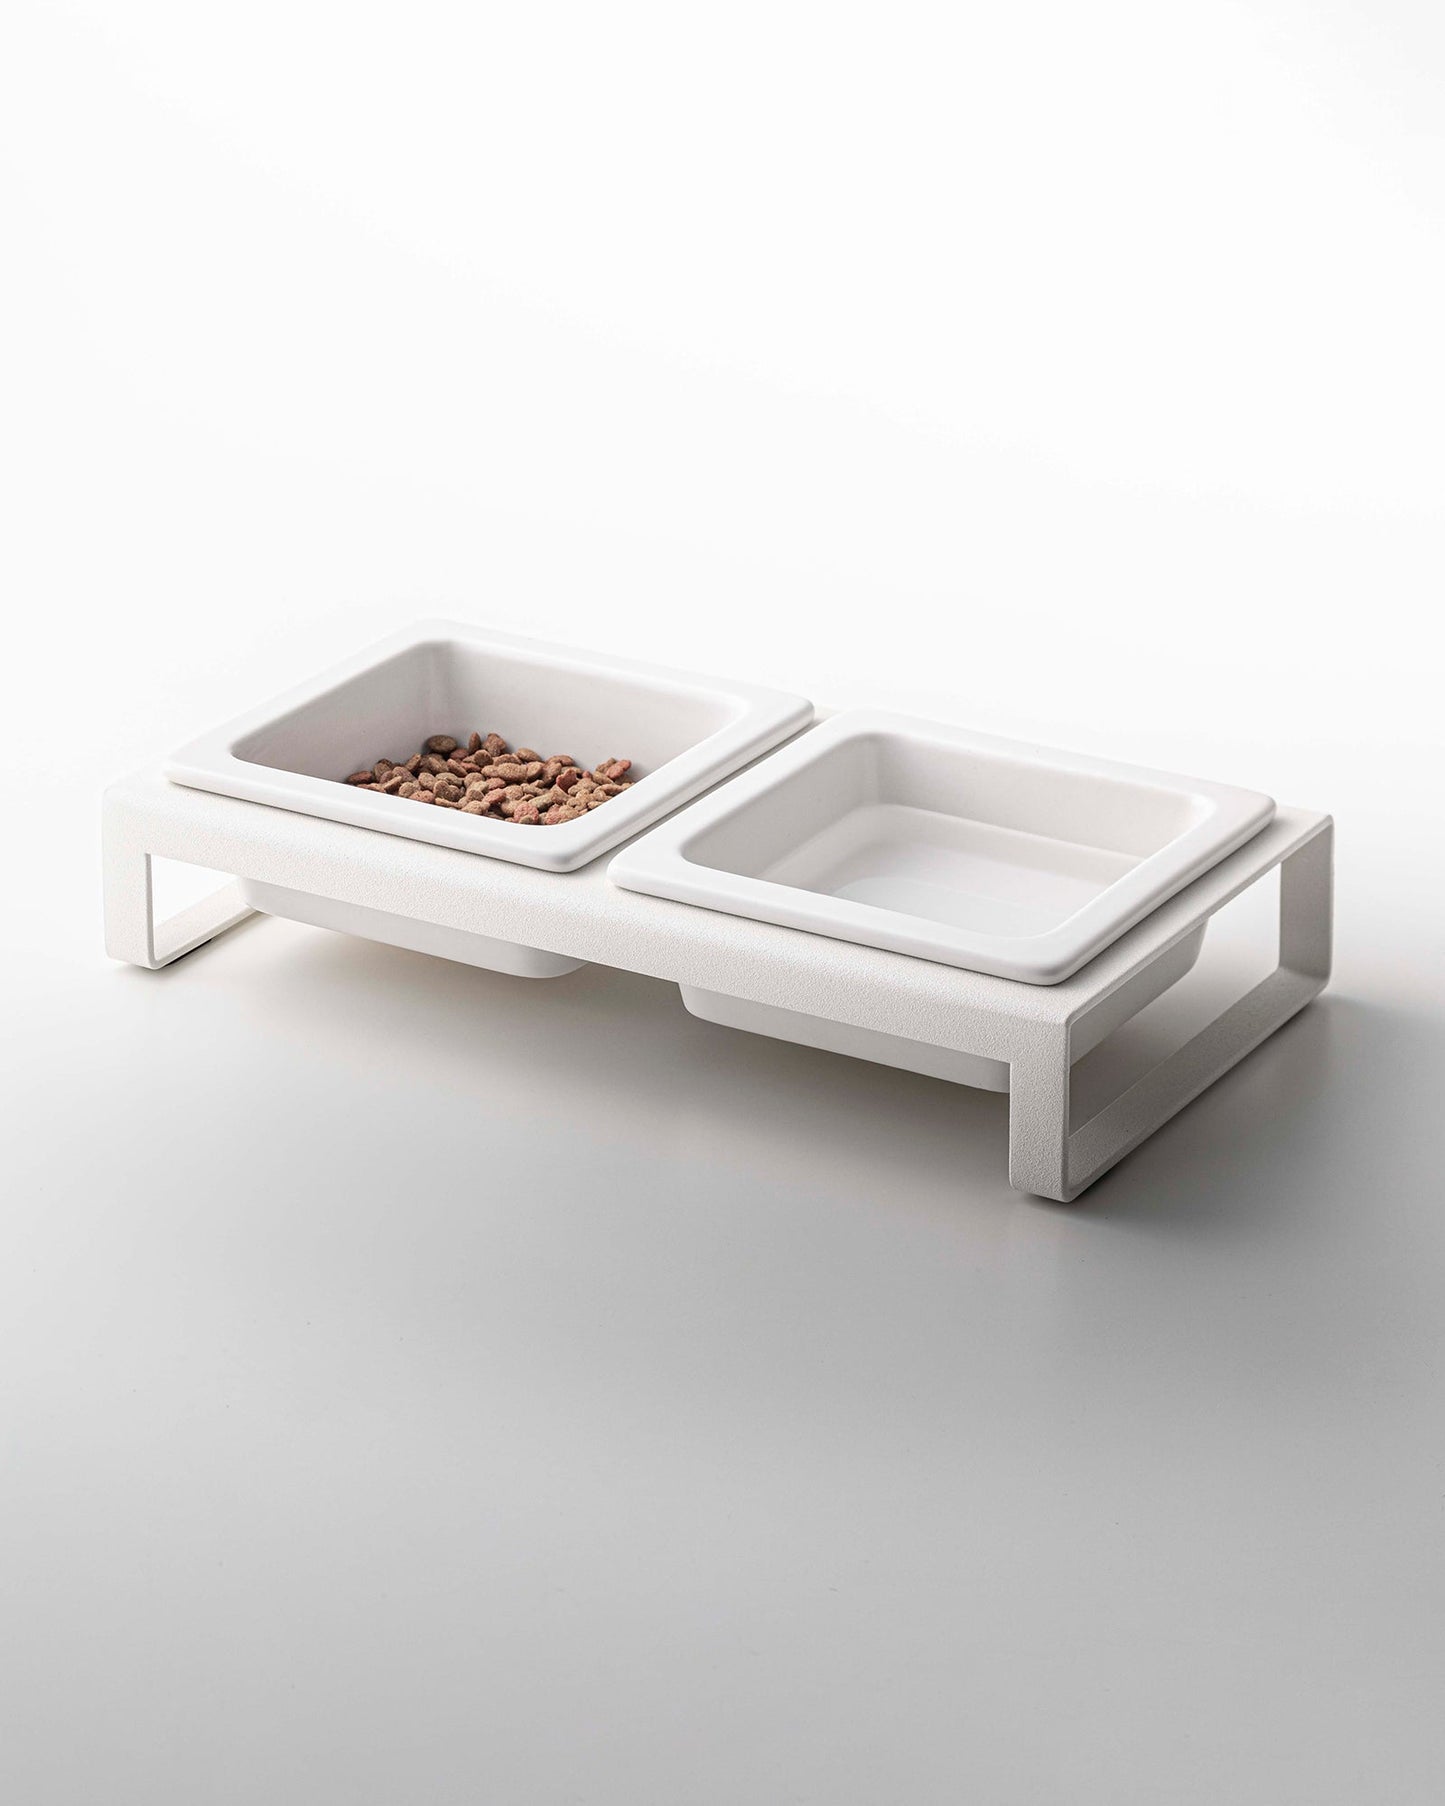 Elevated ceramic Yamazaki Home pet food bowls with one bowl containing food and the other empty, designed for small dogs, against a white background.